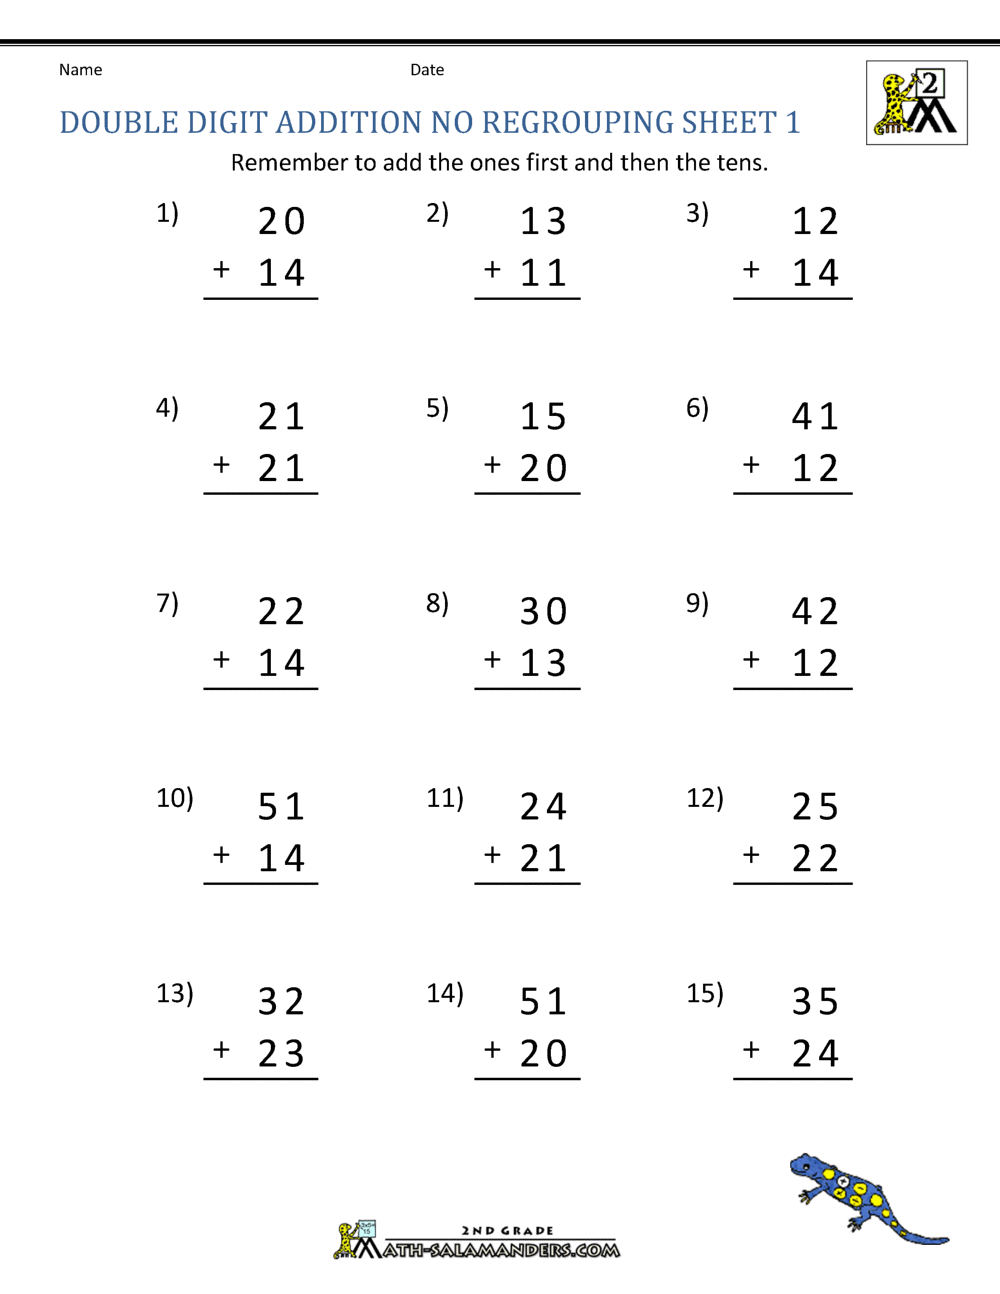 double-digit-addition-without-regrouping